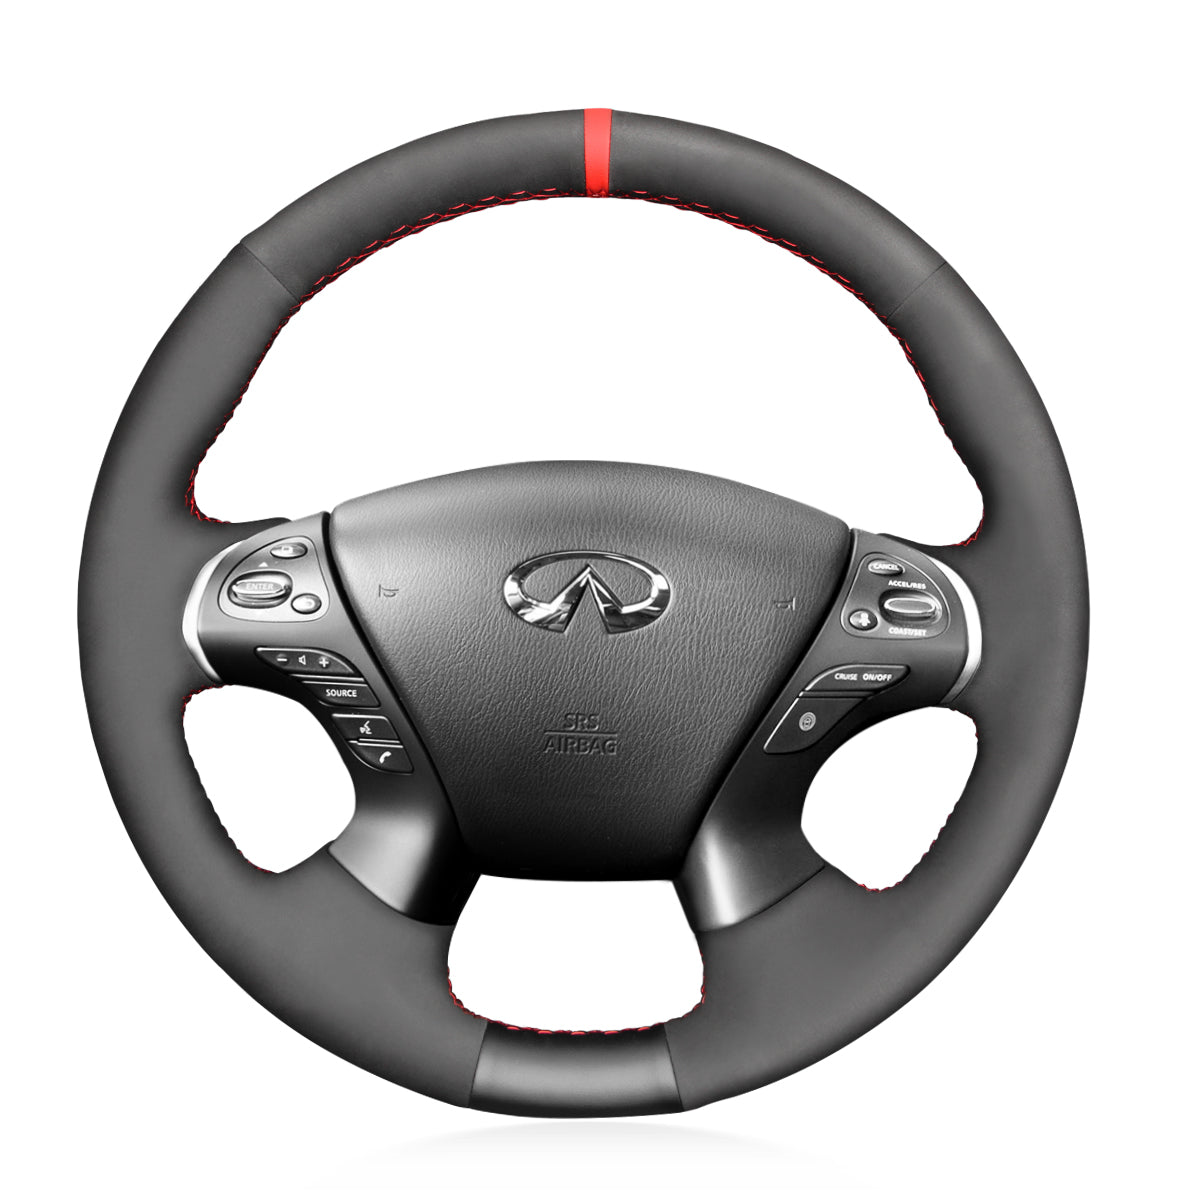 MEWANT Car Steering Wheel Cover for Infiniti JX35